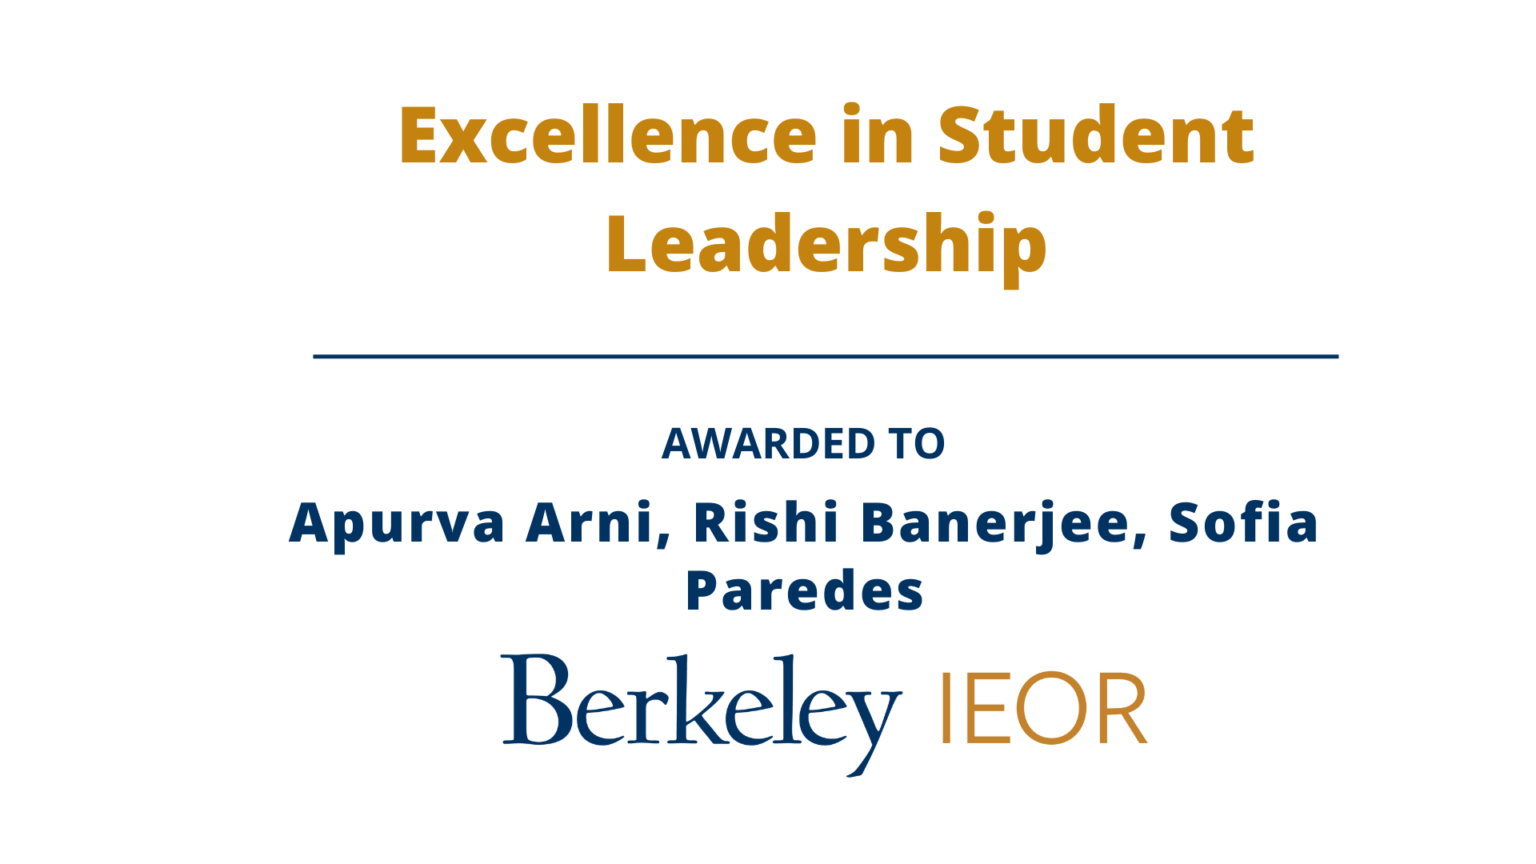 Excellence in Student Leadership